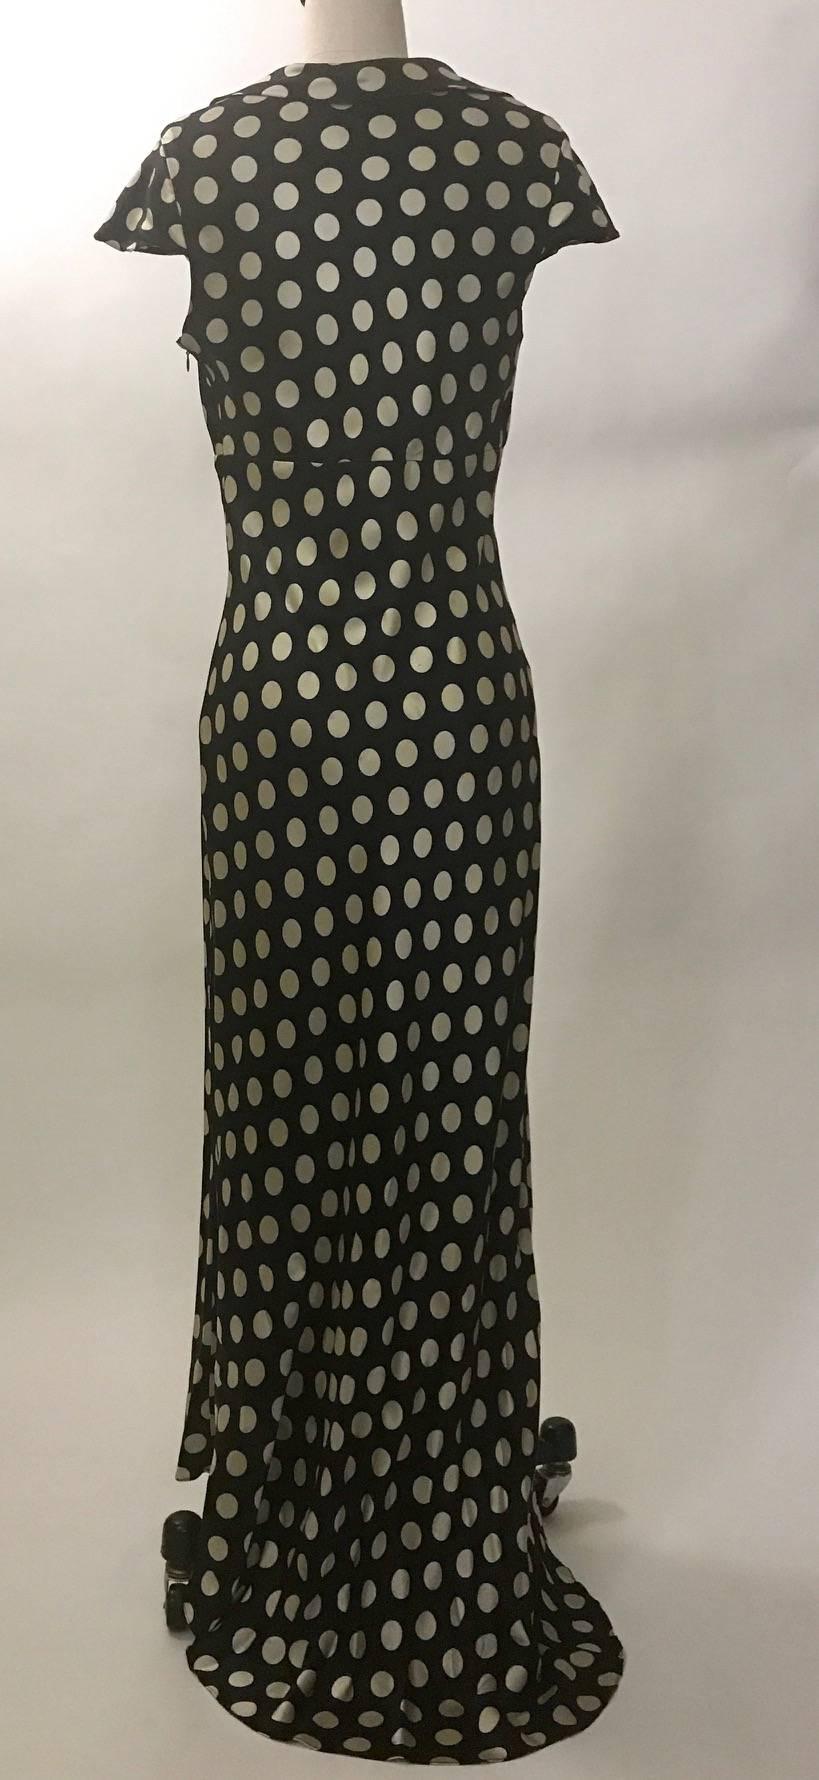 Moschino Couture! 1980's black and off-white polka dot dress with slight train at back. Collar at v-neck. Zipper and hook and eye at side. 

No content tag, based on another Moschino garment we have in the same fabric, we think it's 100% silk.